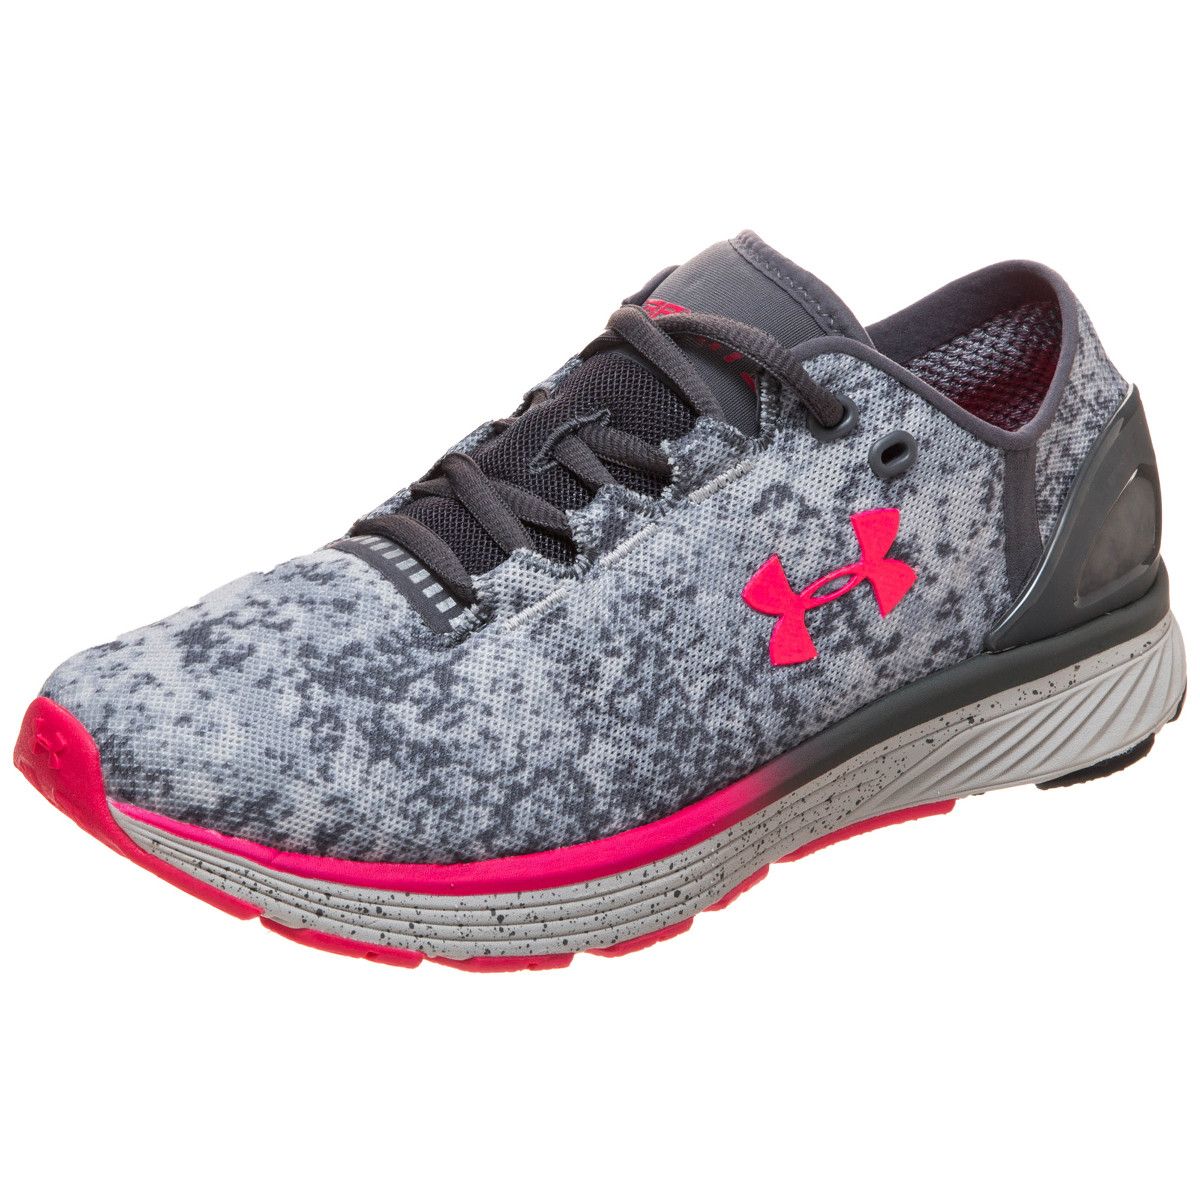 Under Armour Charged Bandit 3 Digi Women's Running Shoes 130